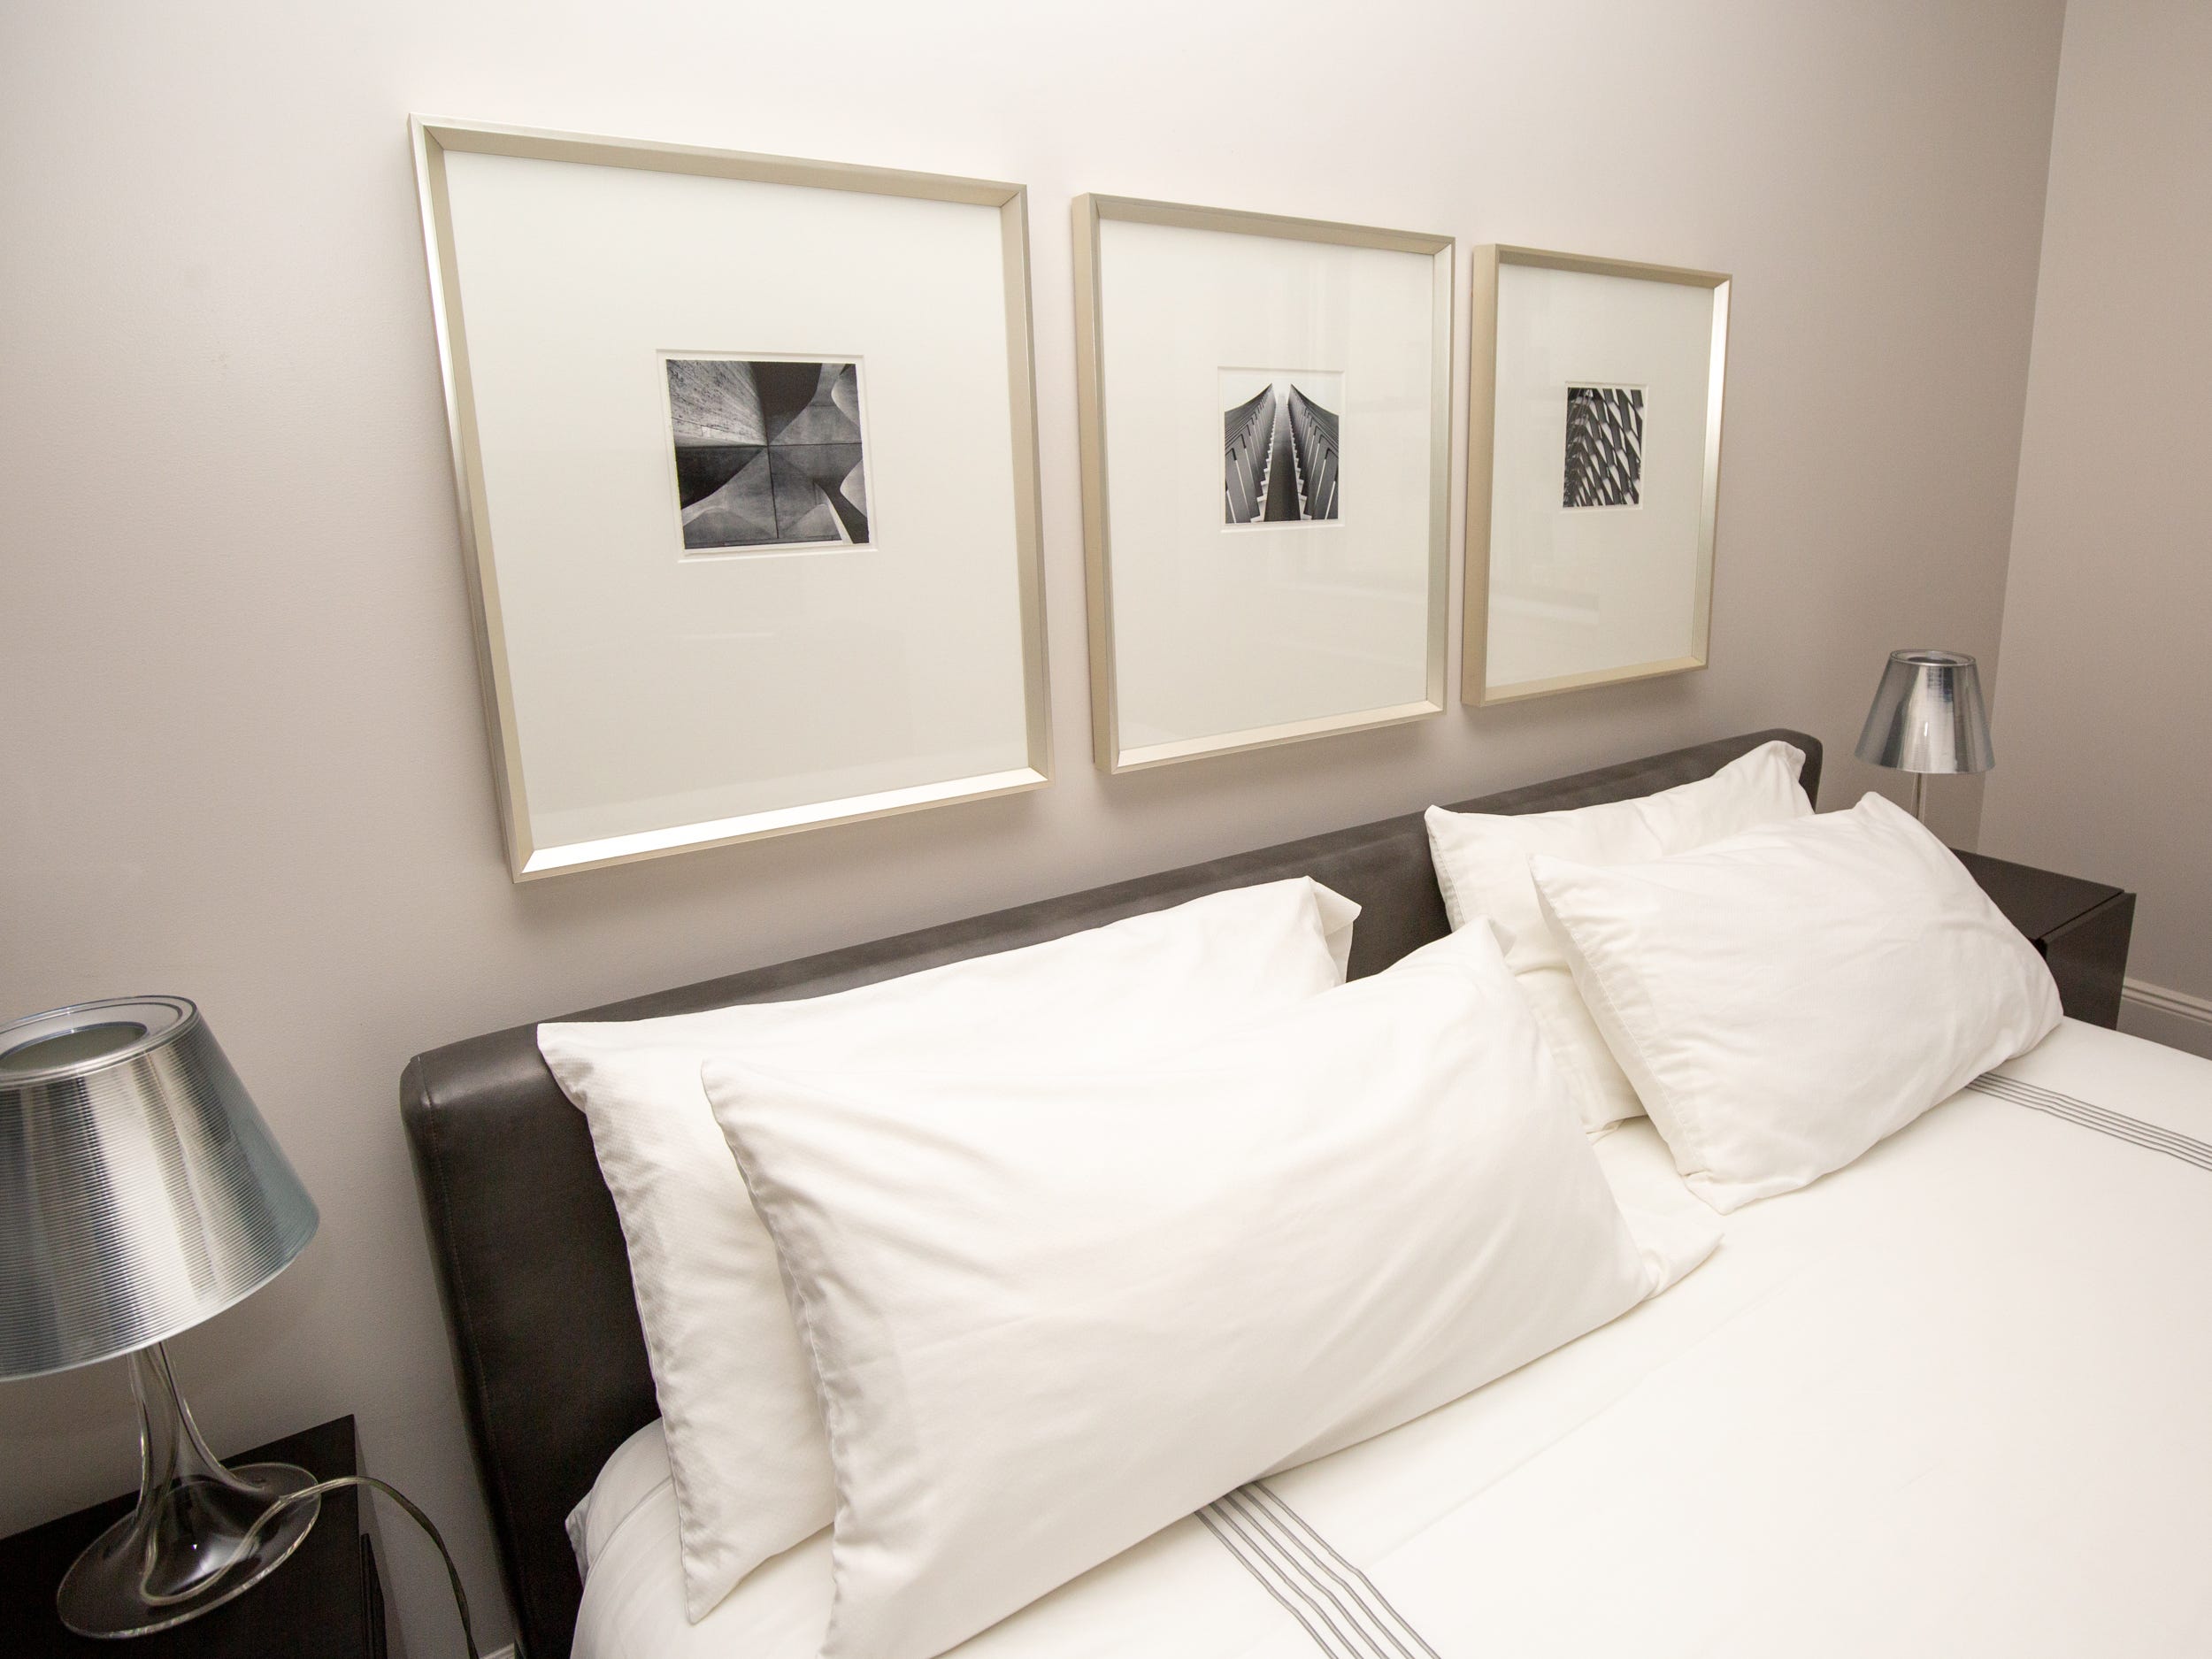 Wall art hanging above a bed with two night stands.